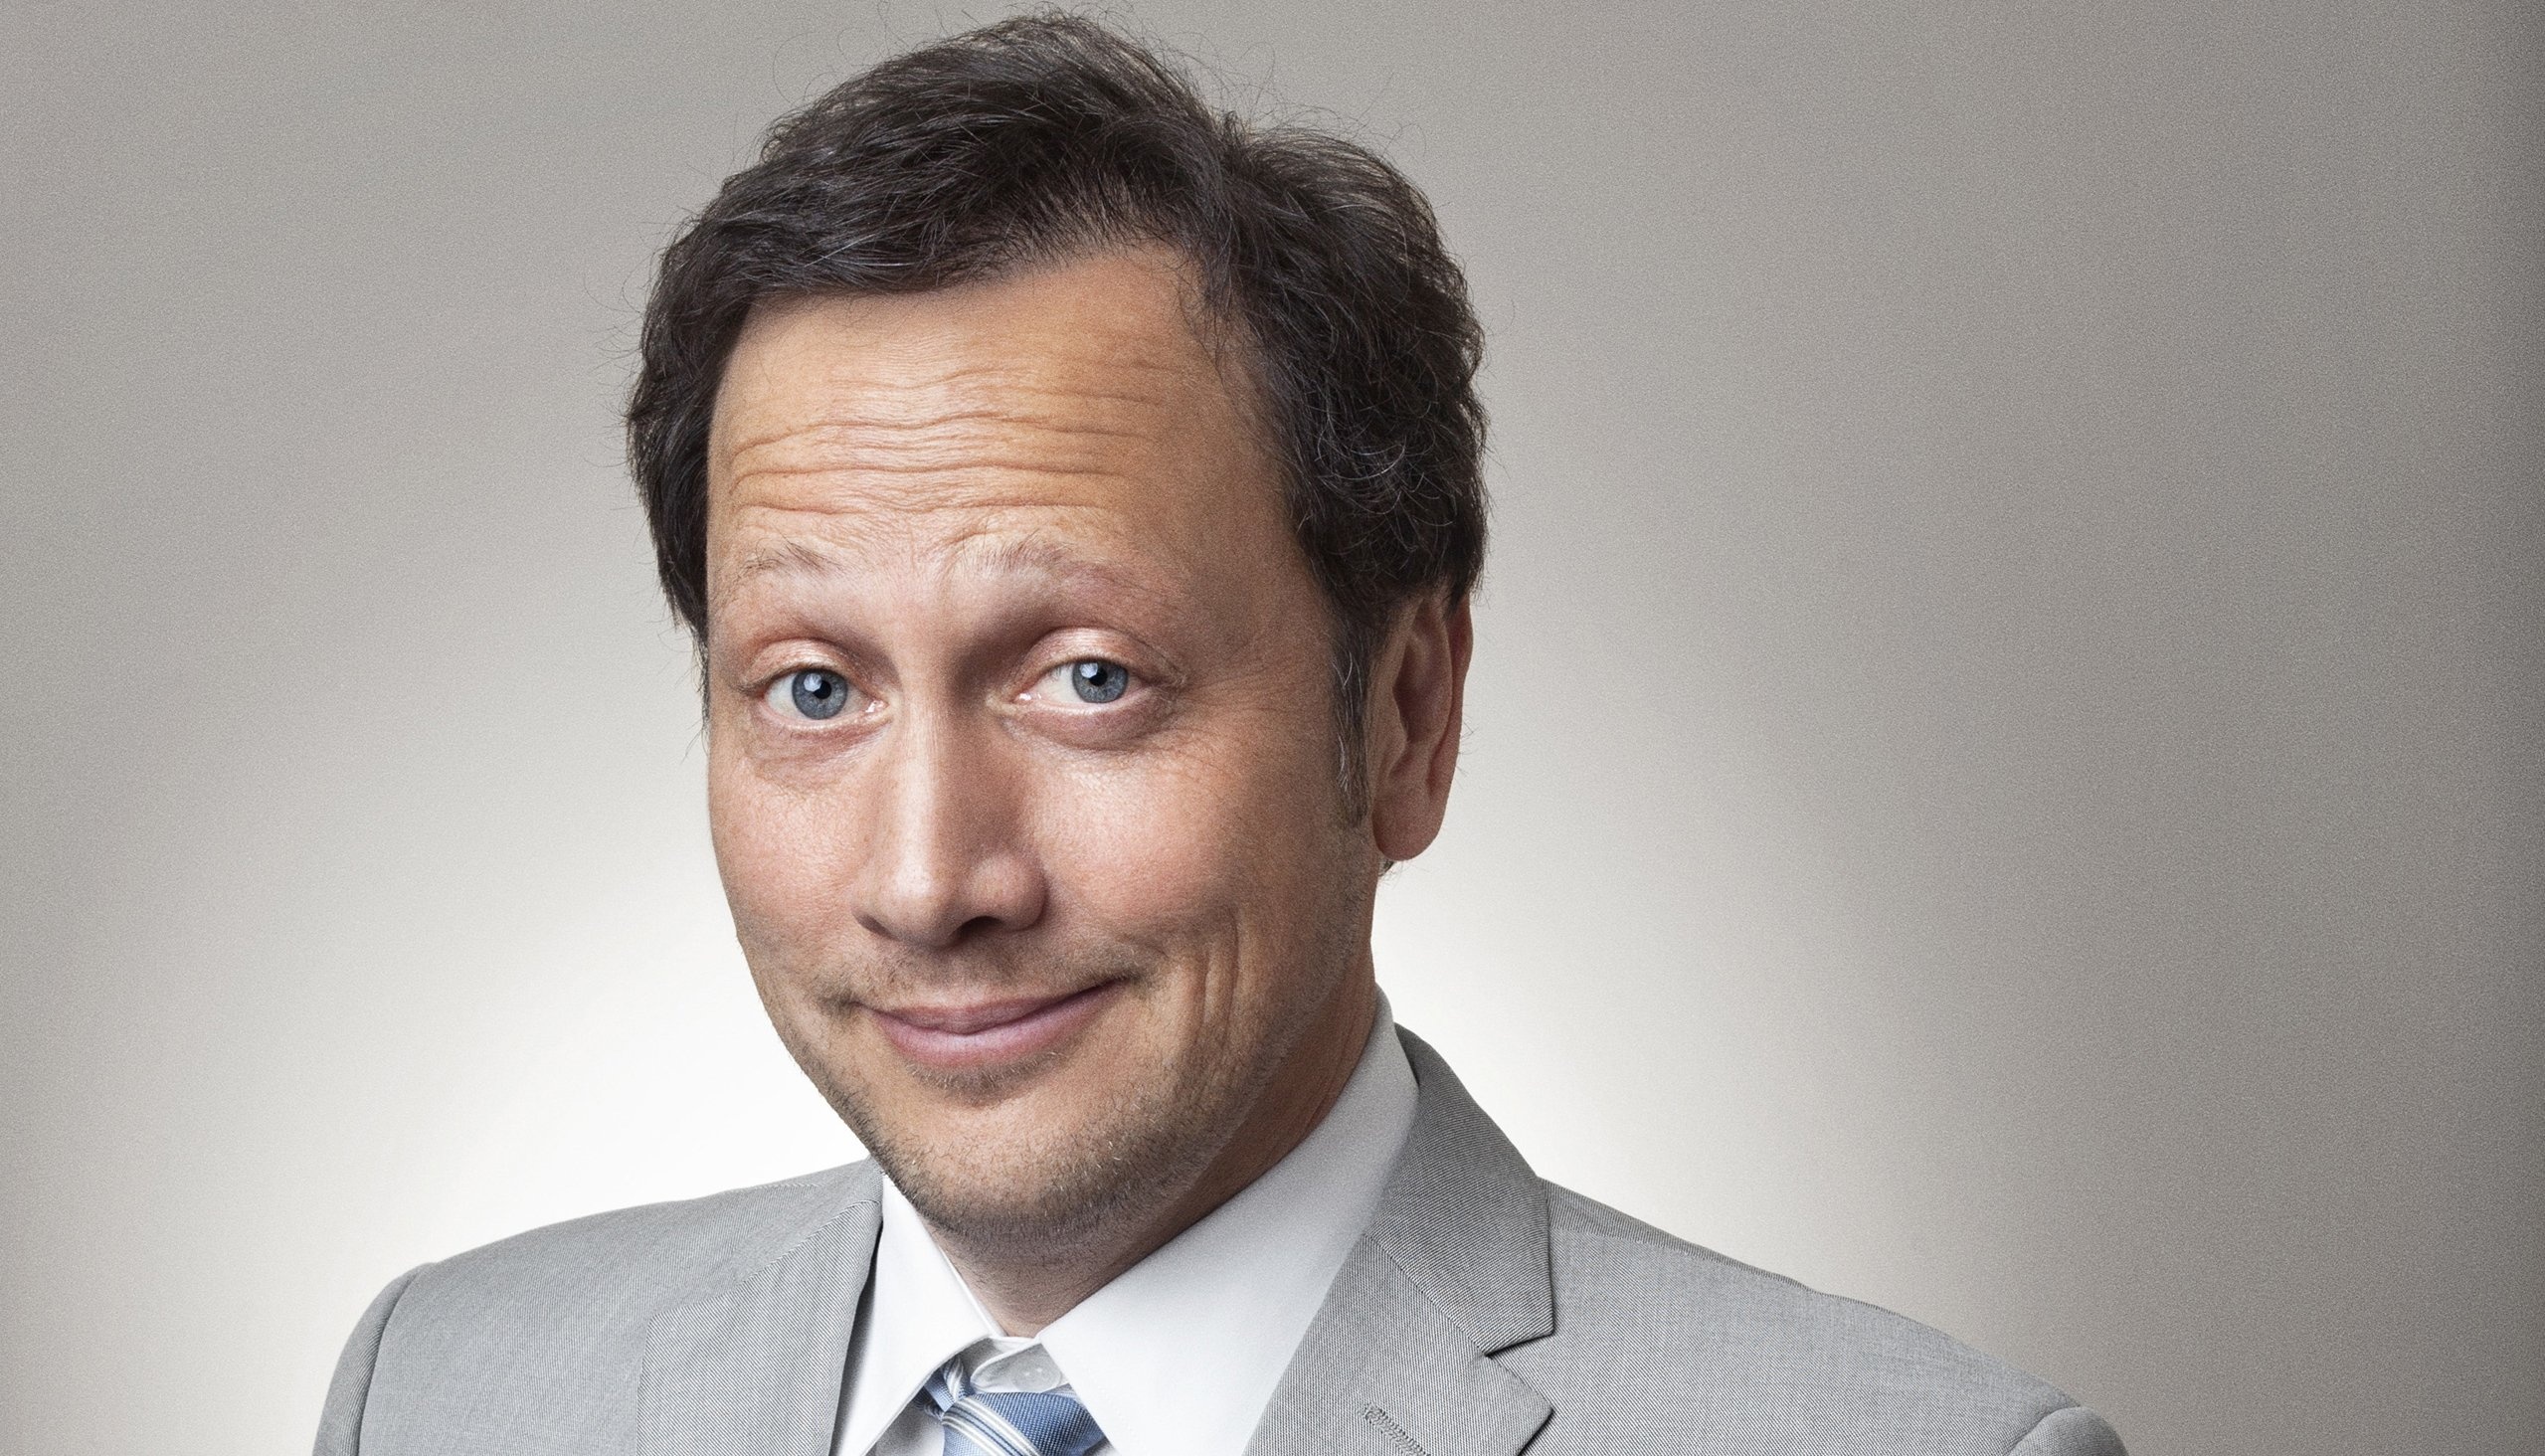 Rob Schneider: Co-starred in the baseball-themed family comedy The Benchwarmers as Gus Matthews. 2560x1470 HD Wallpaper.